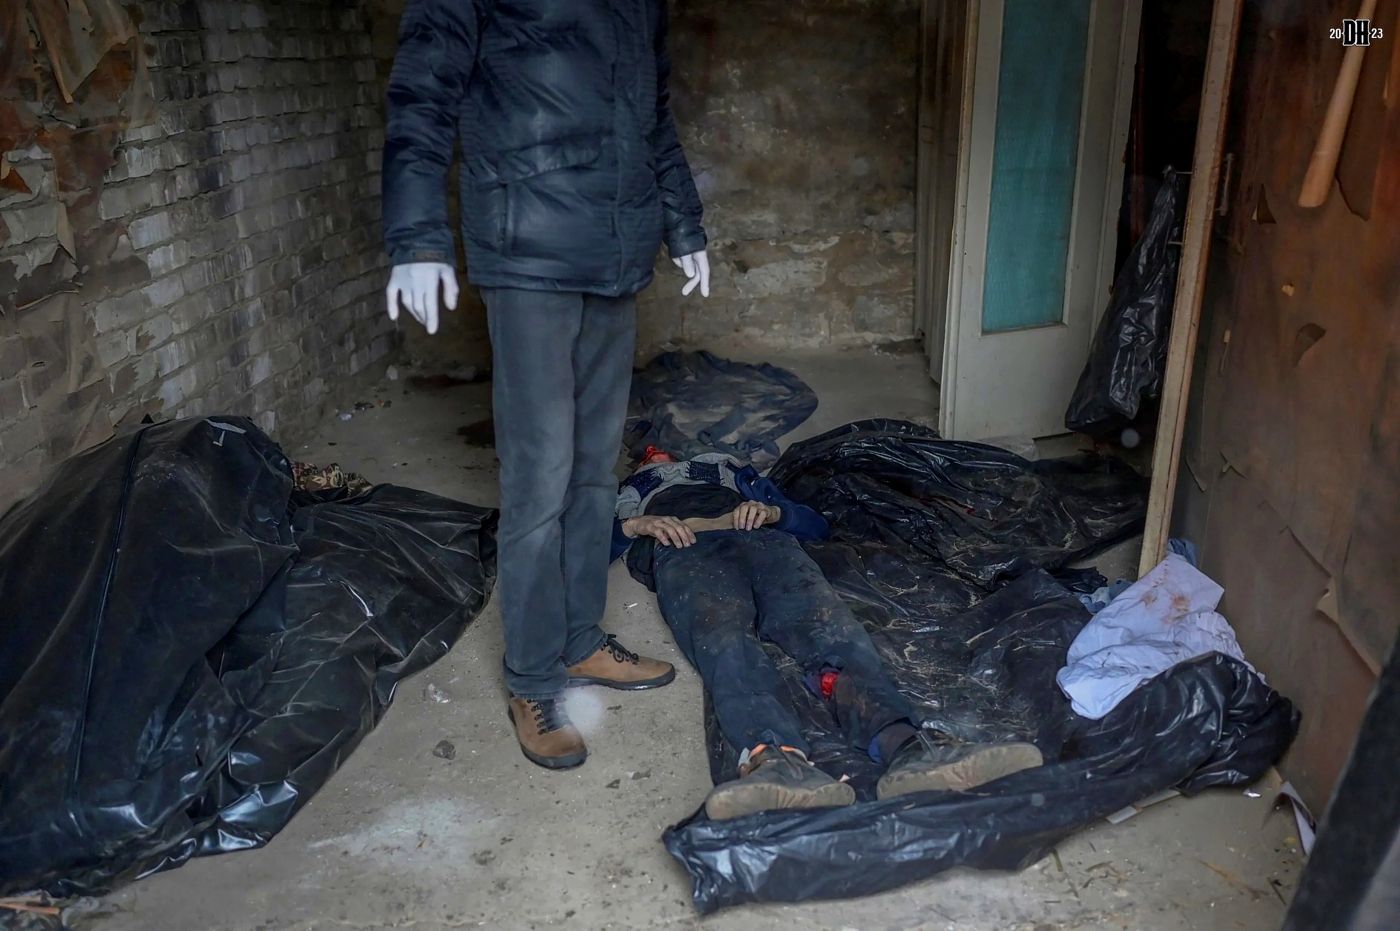 DH - Civilians and military in morgue 3 - Mykolaiv - Ukraine - early 2022.jpg